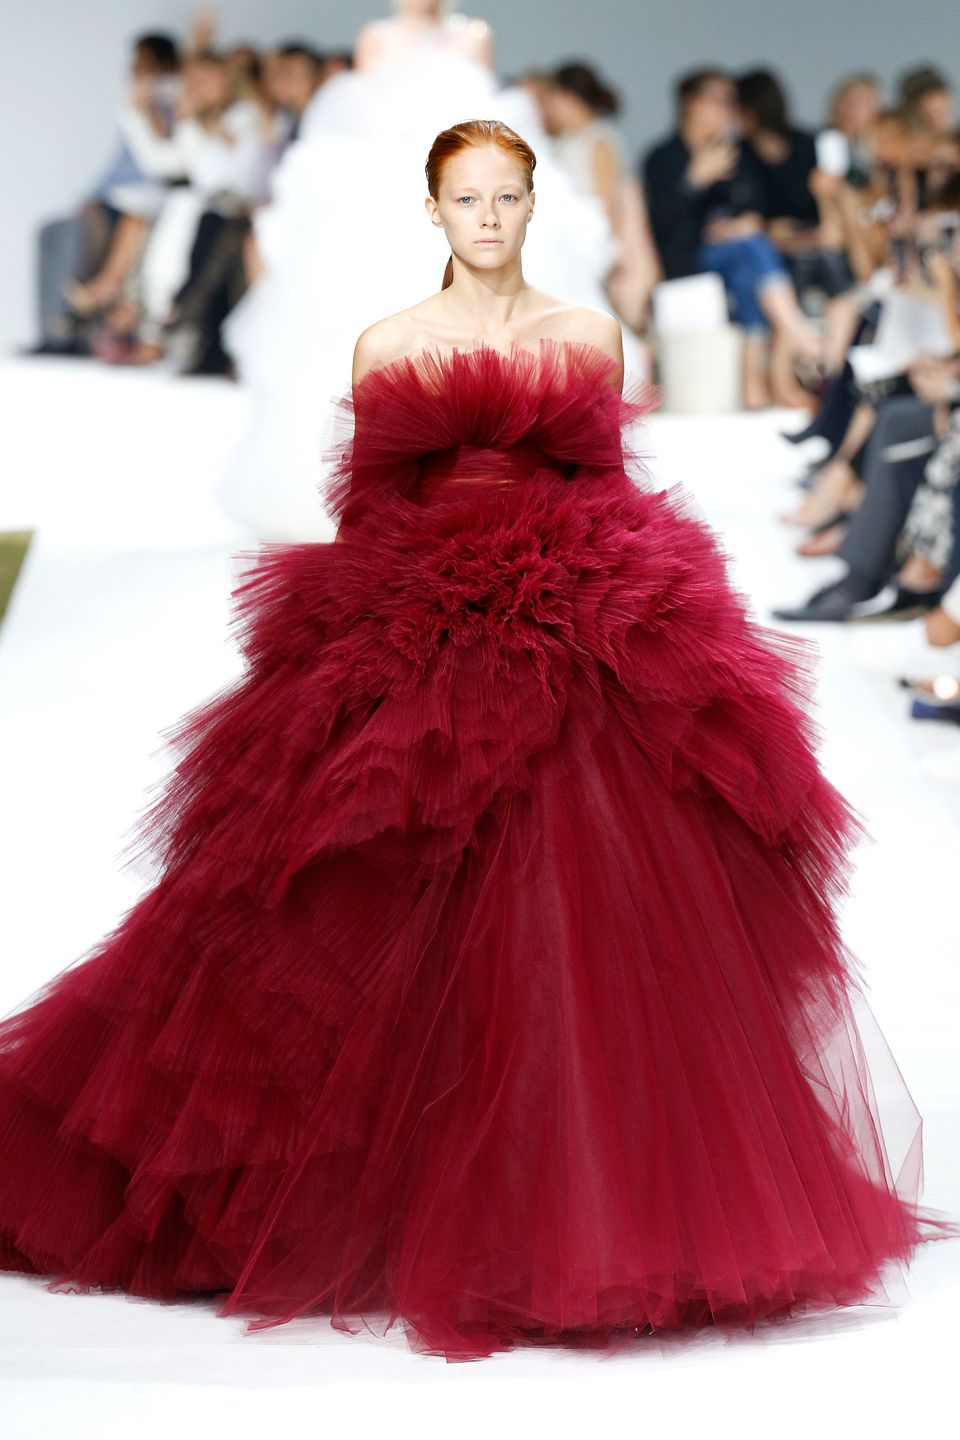 Paris Haute Couture Fashion Week 2016: The Dreamiest Dresses On The ...